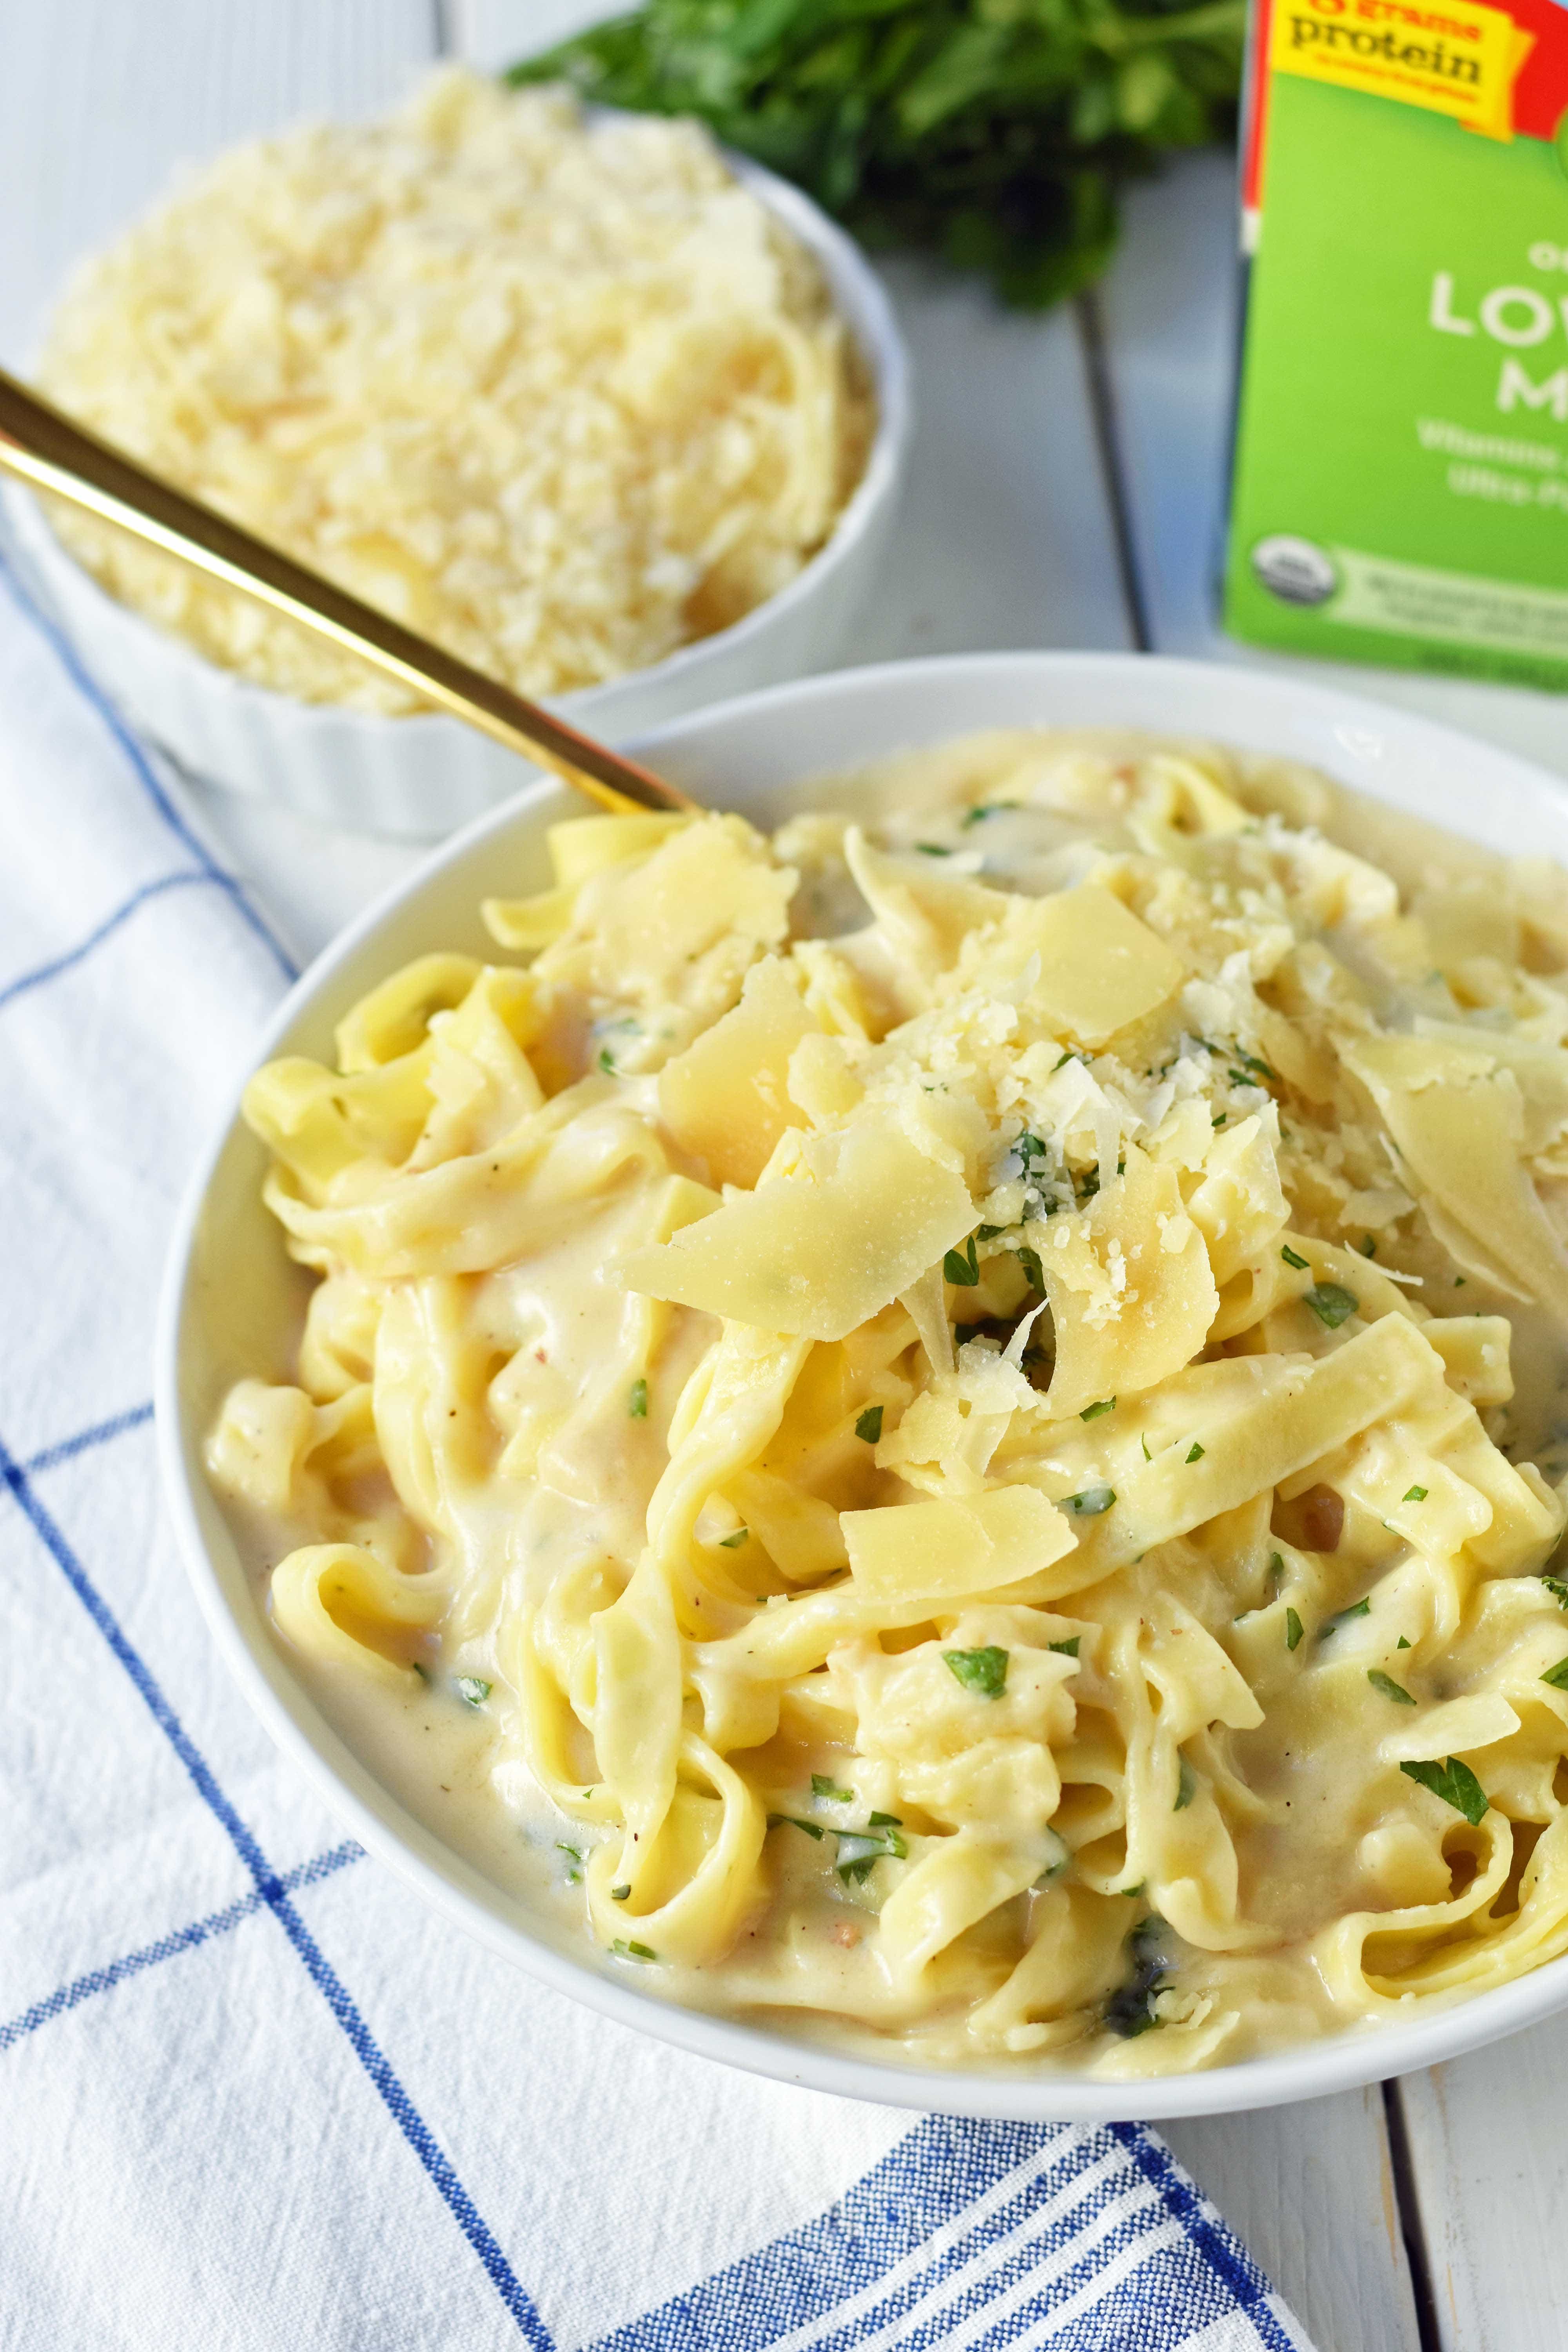 Skinny Fettuccine Alfredo is a low-fat version of America's favorite pasta dish. Rich and creamy fettuccine alfredo without all of the fat. This skinny fettuccine alfredo sauce is made with milk instead of heavy cream and has all of the flavor as the original. A 30-minute healthy meal that kids love. www.modernhoney.com